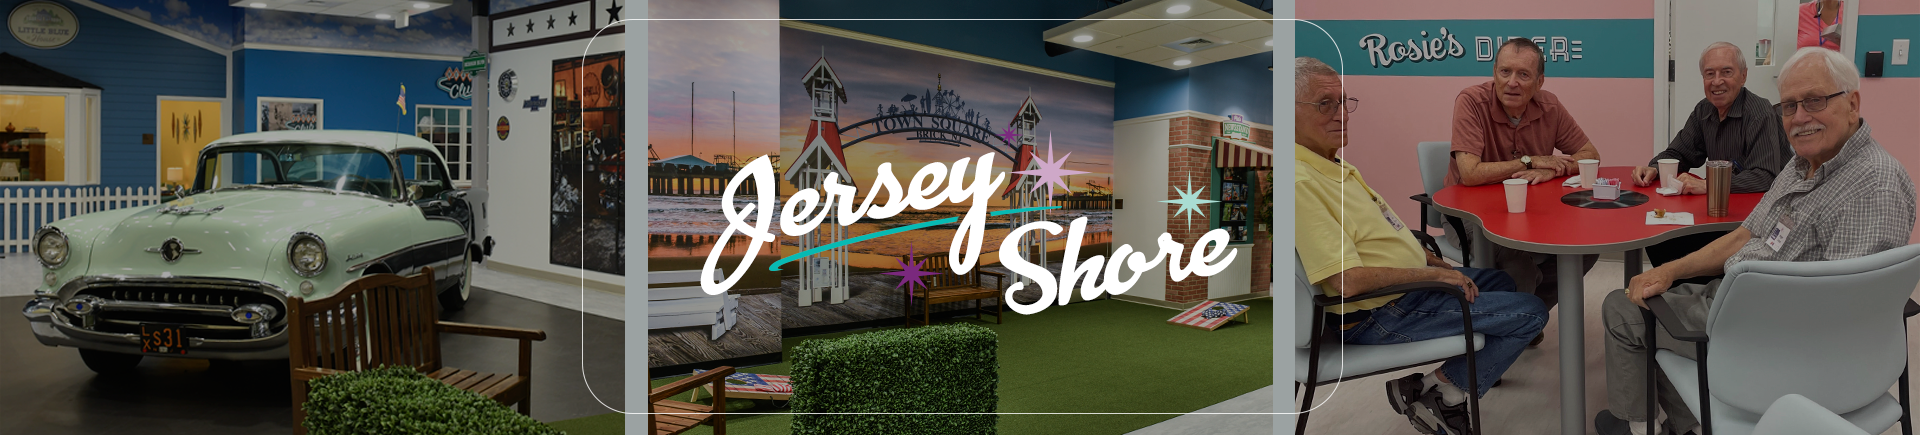 Town Square Jersey Shore – Groundbreaking Adult Day Enrichment Center Celebrates Grand Opening